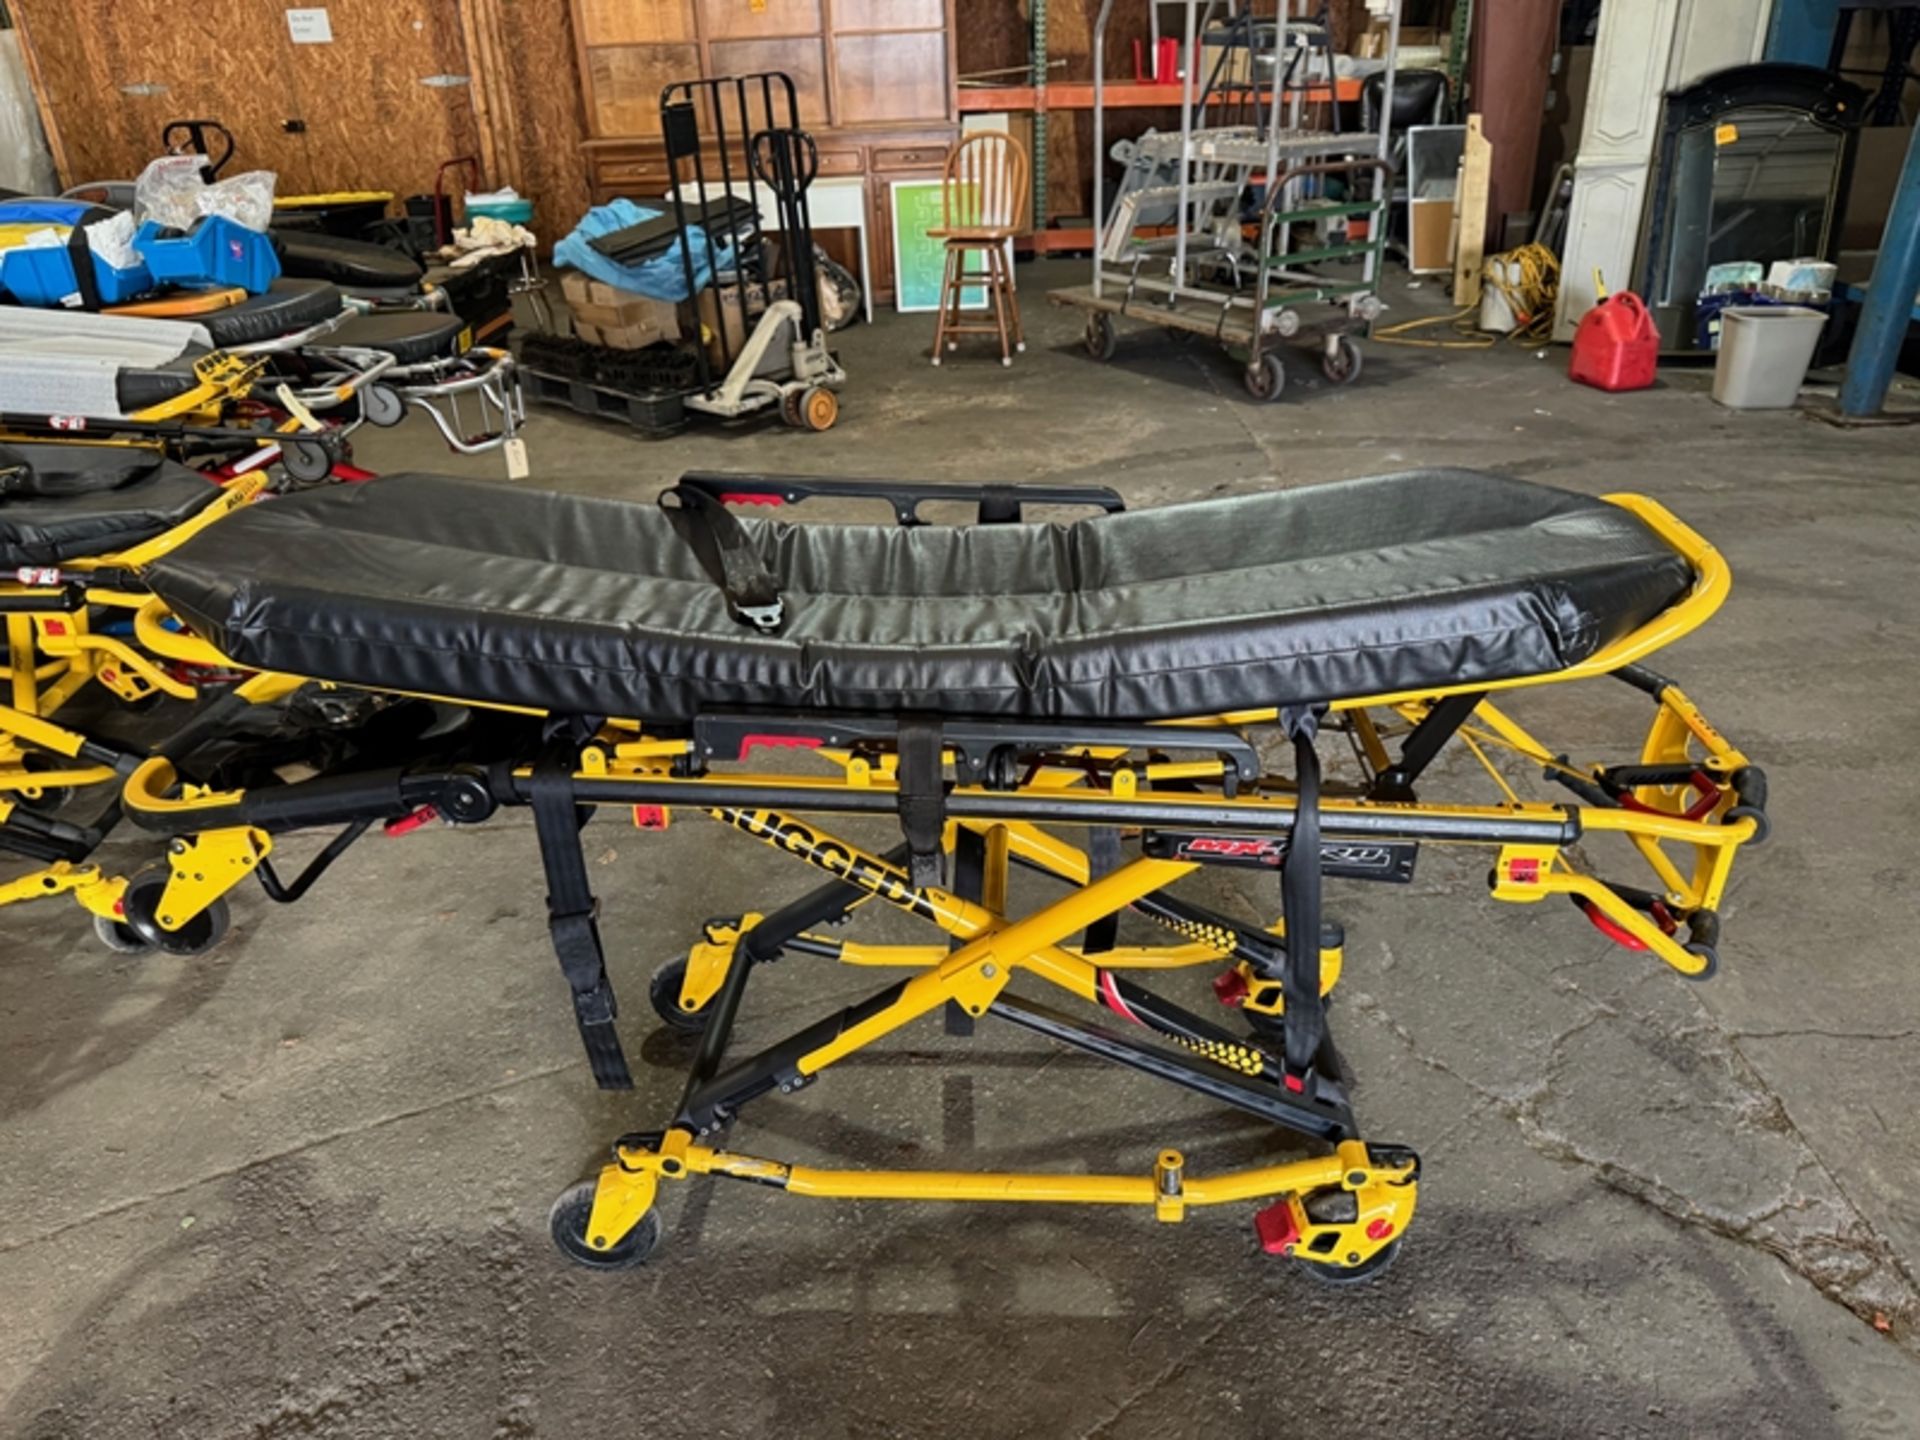 STRYKER 600LB stretcher - S/N: 020239307 - Image 2 of 2